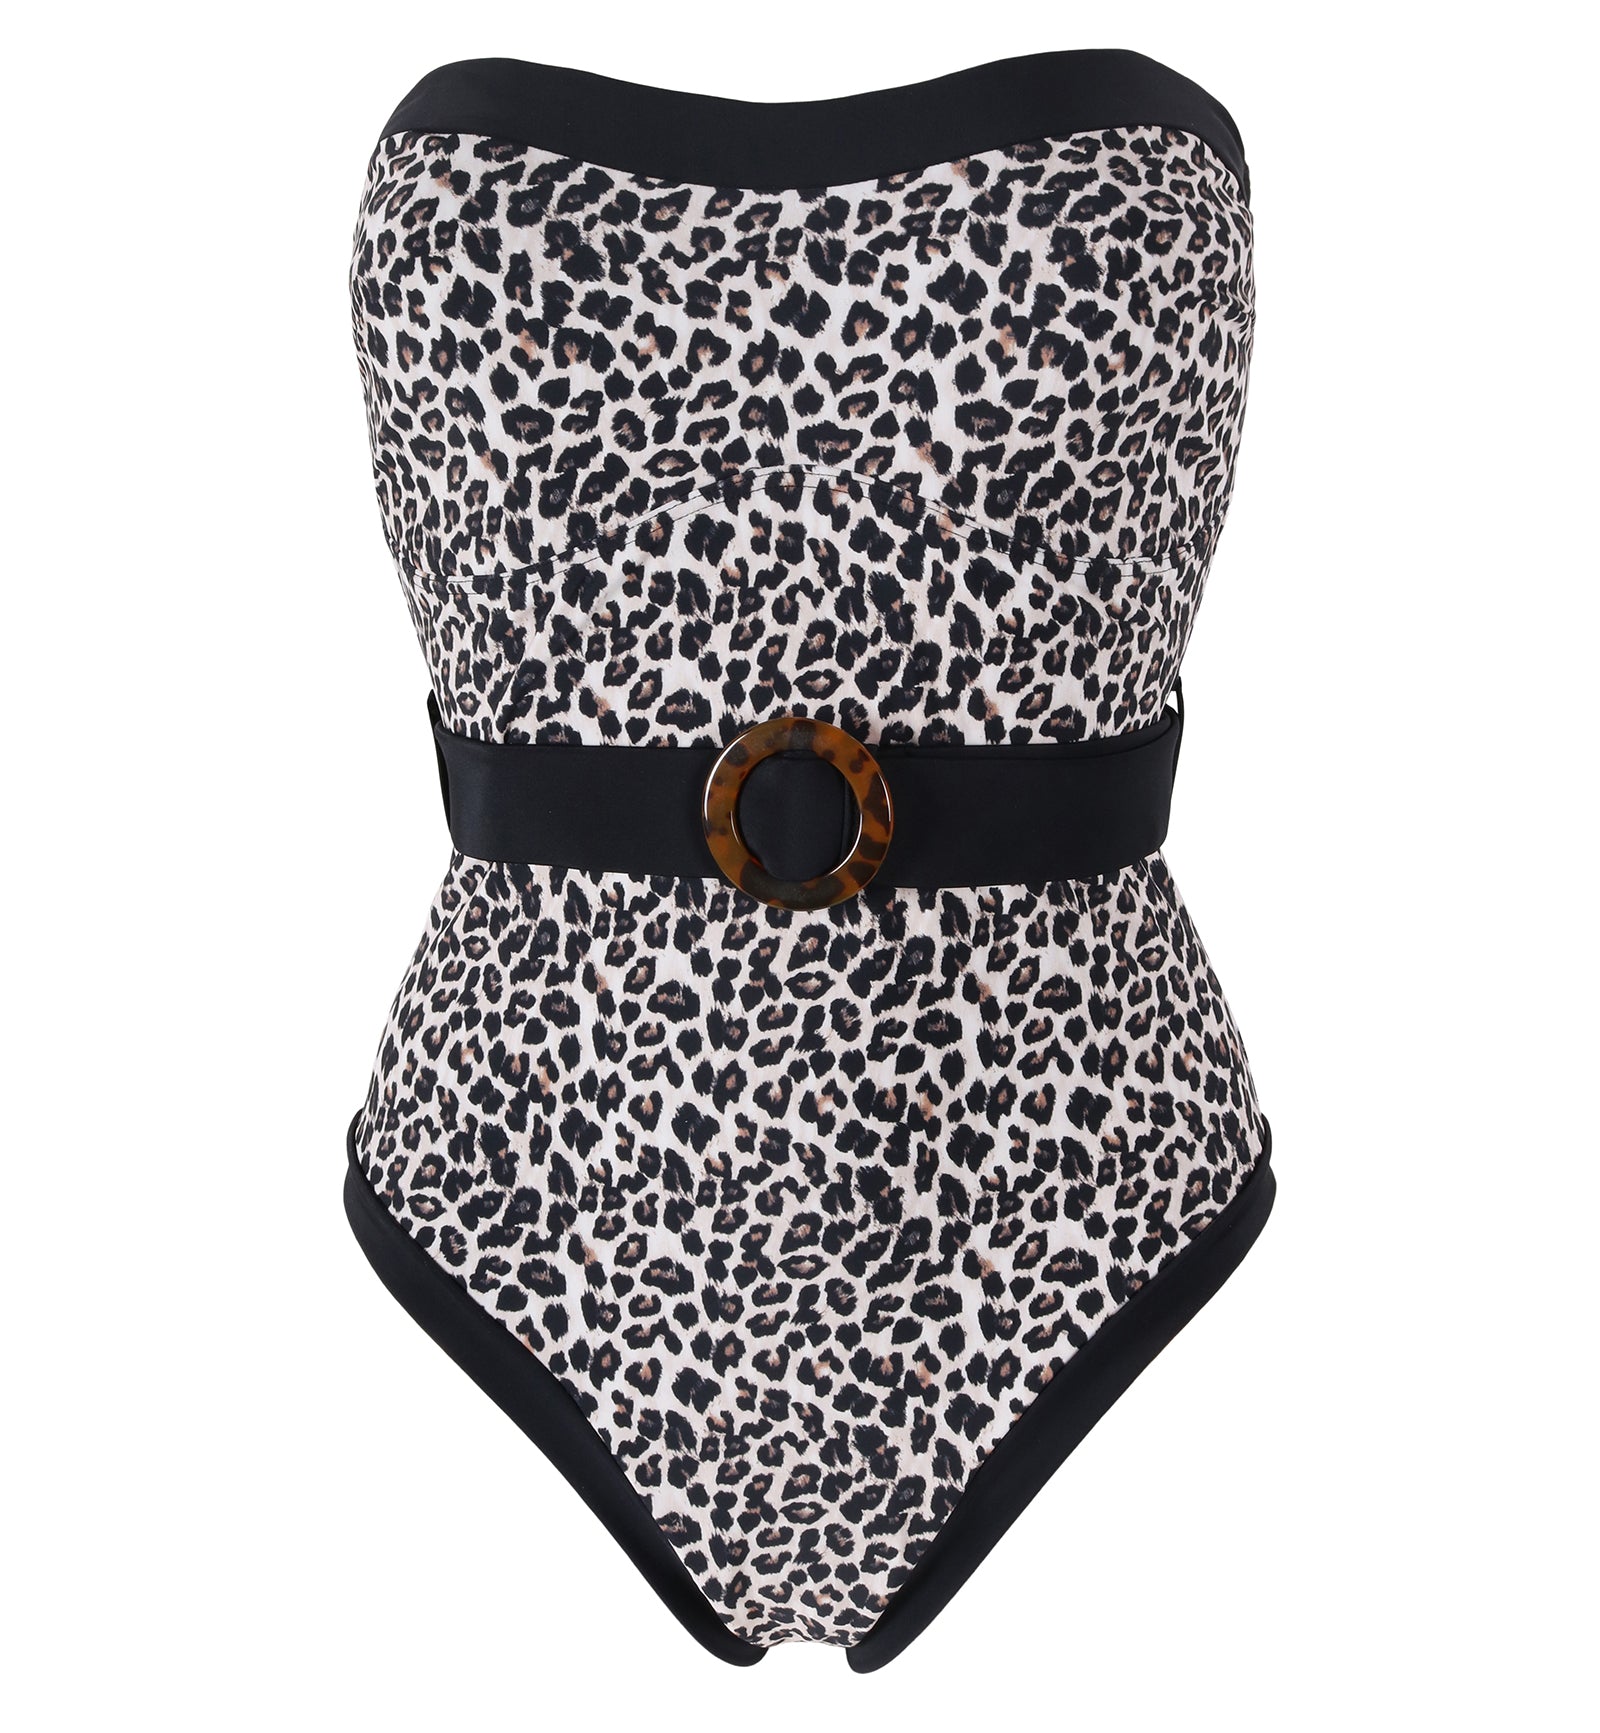 Pour Moi Removable Straps Belted Control Swimsuit (PM1414),Small,Leopard - Leopard,Small